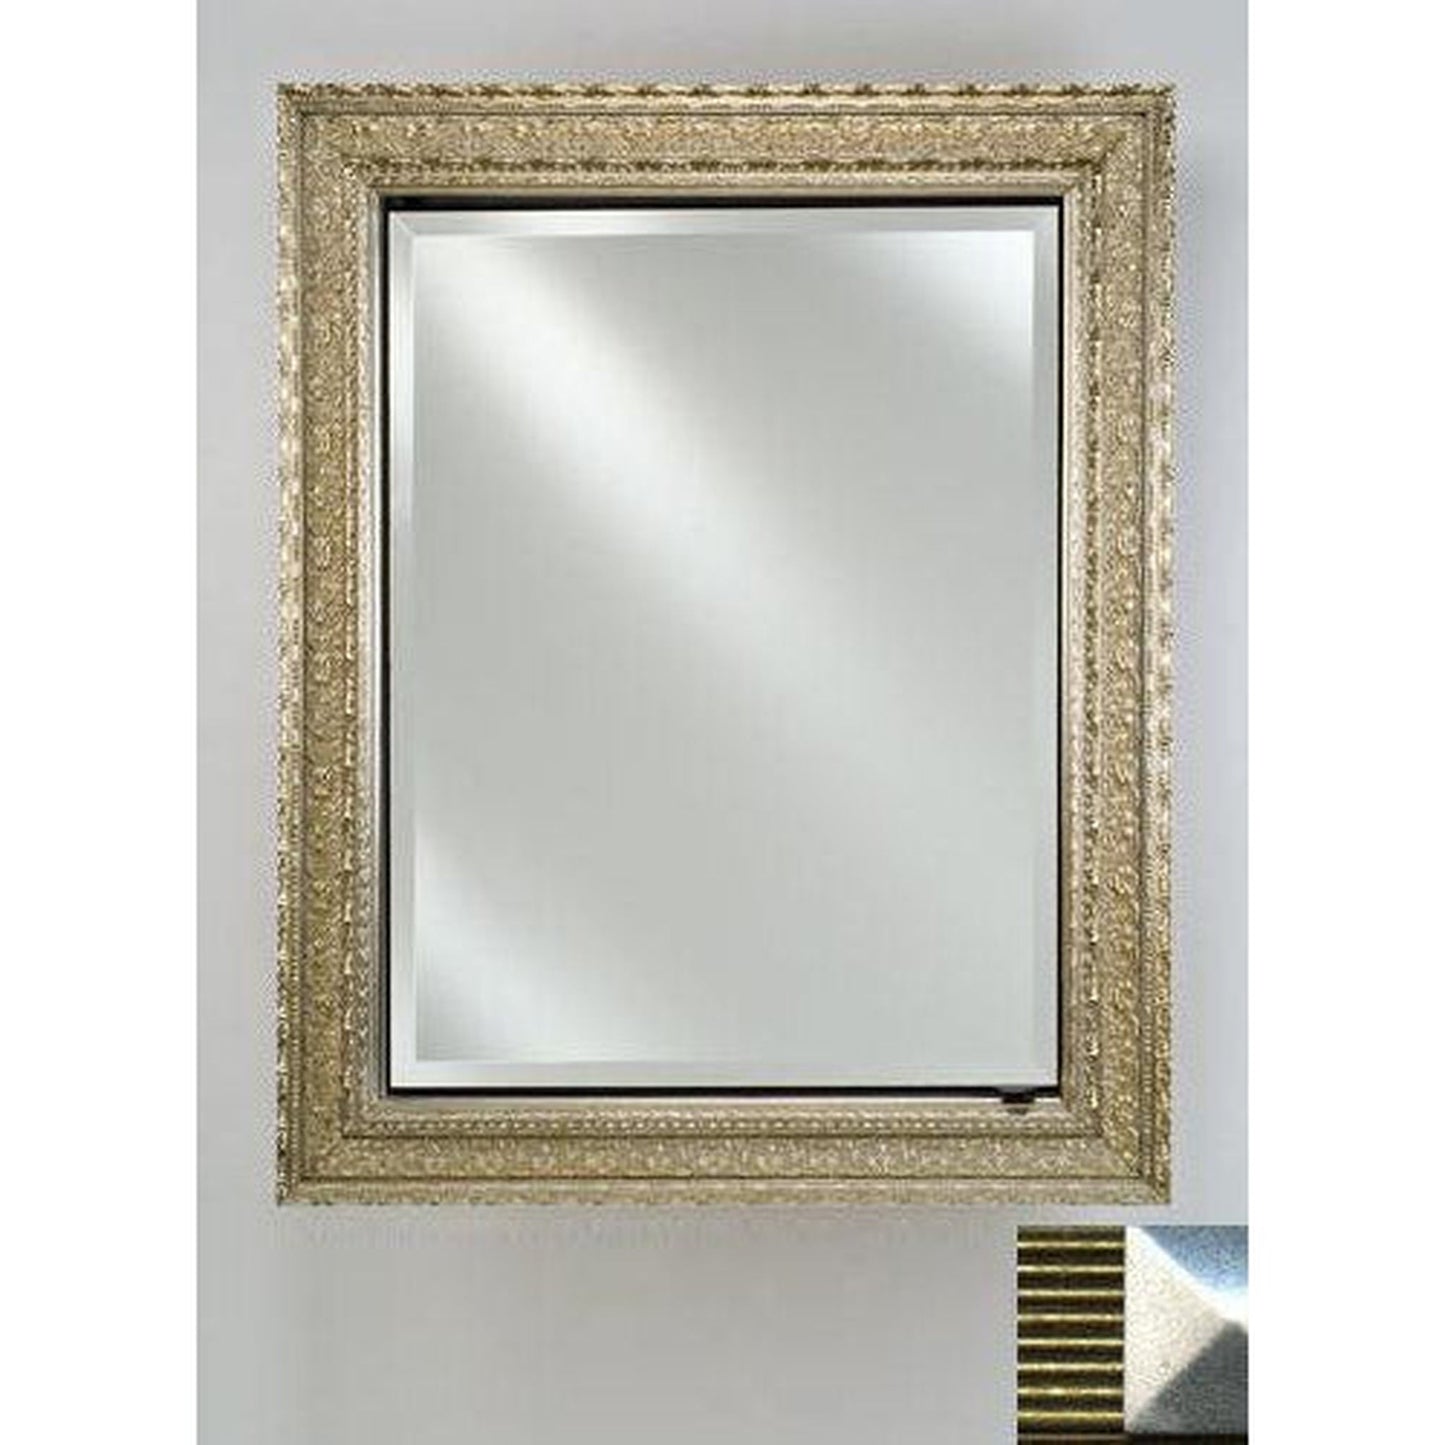 Afina Signature 24" x 30" Meridian Antique Gold With Antique Silver Caps Recessed Reversible Hinged Single Door Medicine Cabinet With Beveled Edge Mirror